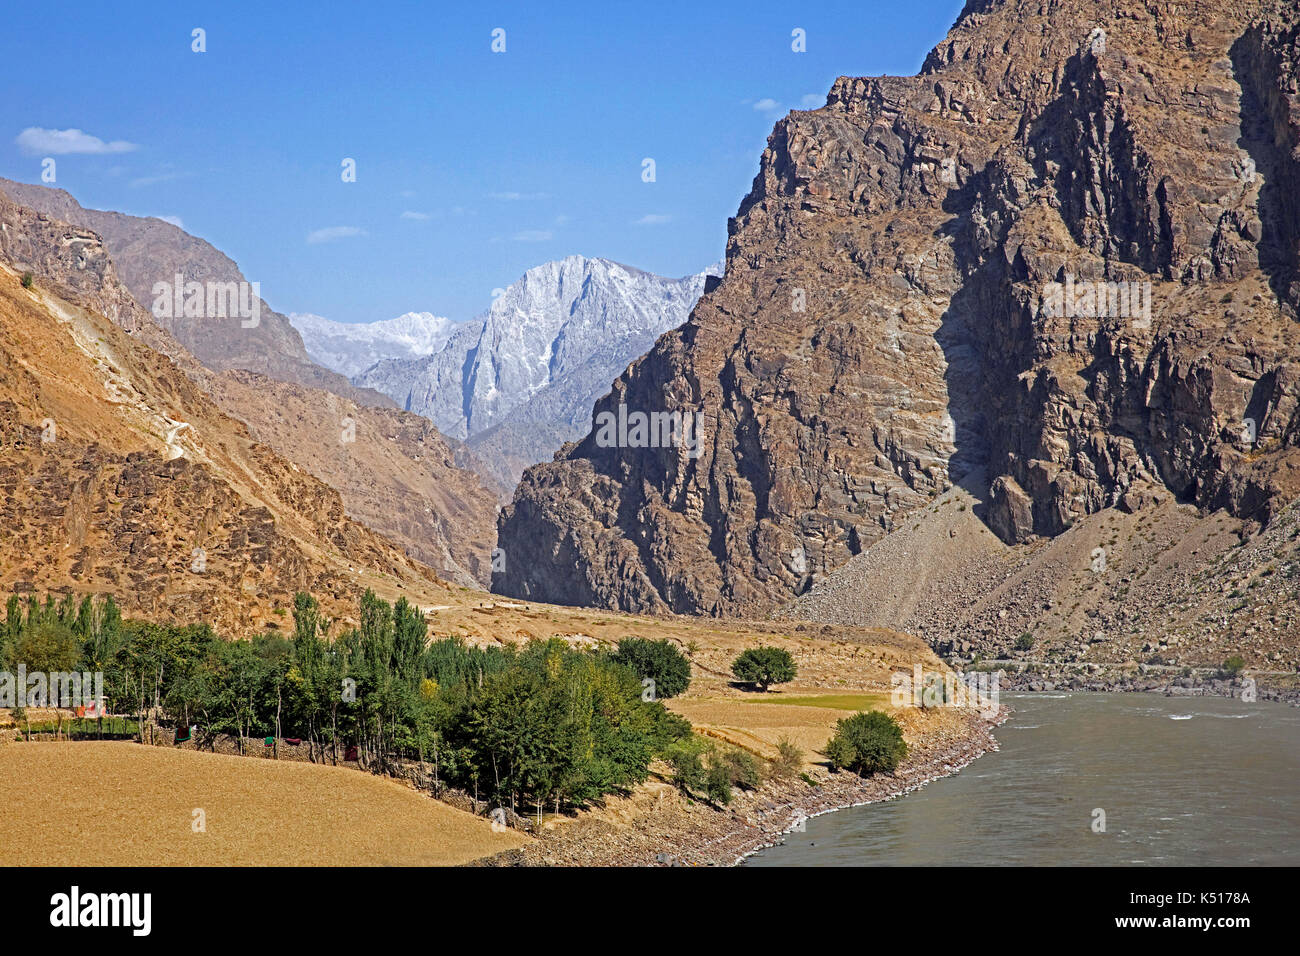 The Pamir Highway / M41 along the Panji River marking the border between Tajikistan and Afghanistan Stock Photo